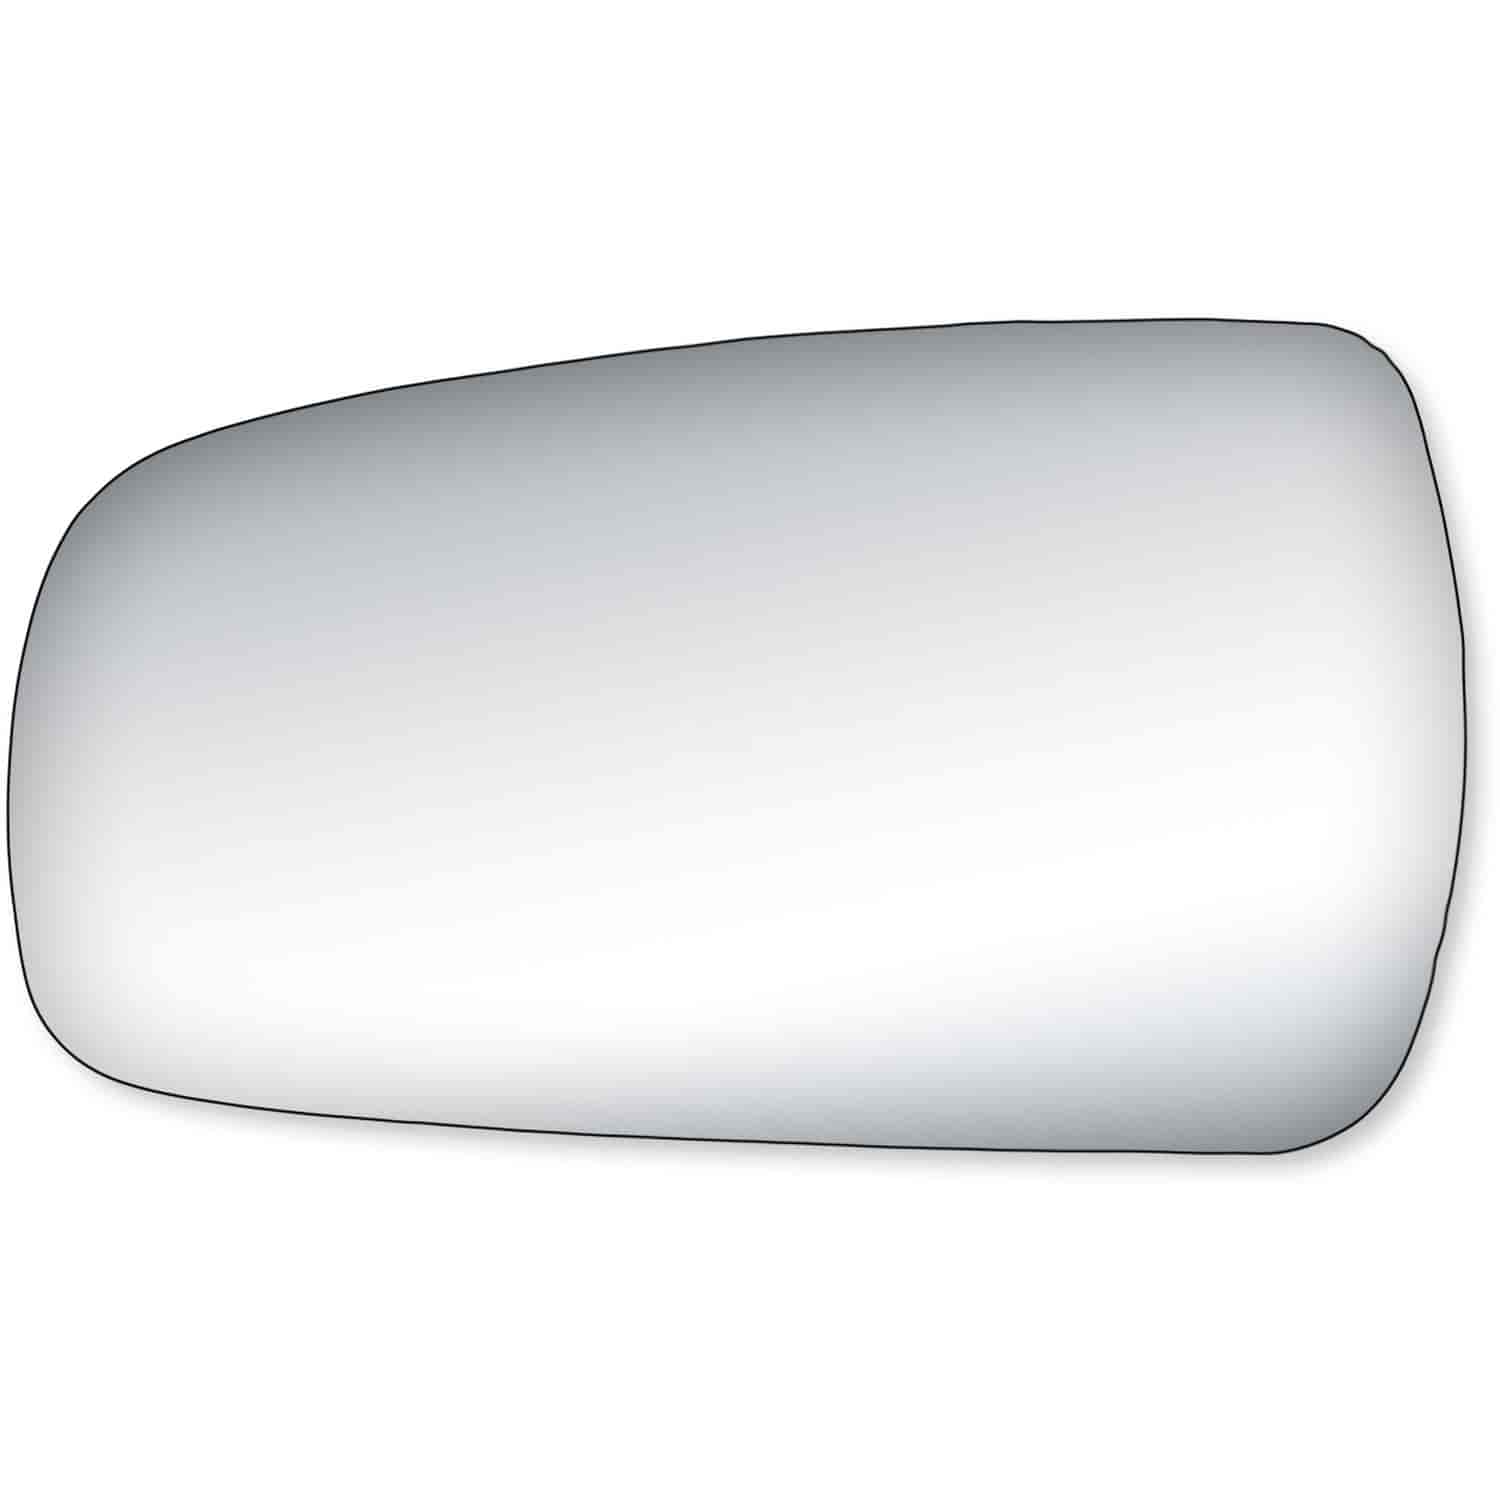 Replacement Glass for 96-99 Infiniti I30 ; 96-99 Maxima the glass measures 3 5/8 tall by 6 1/4 wide